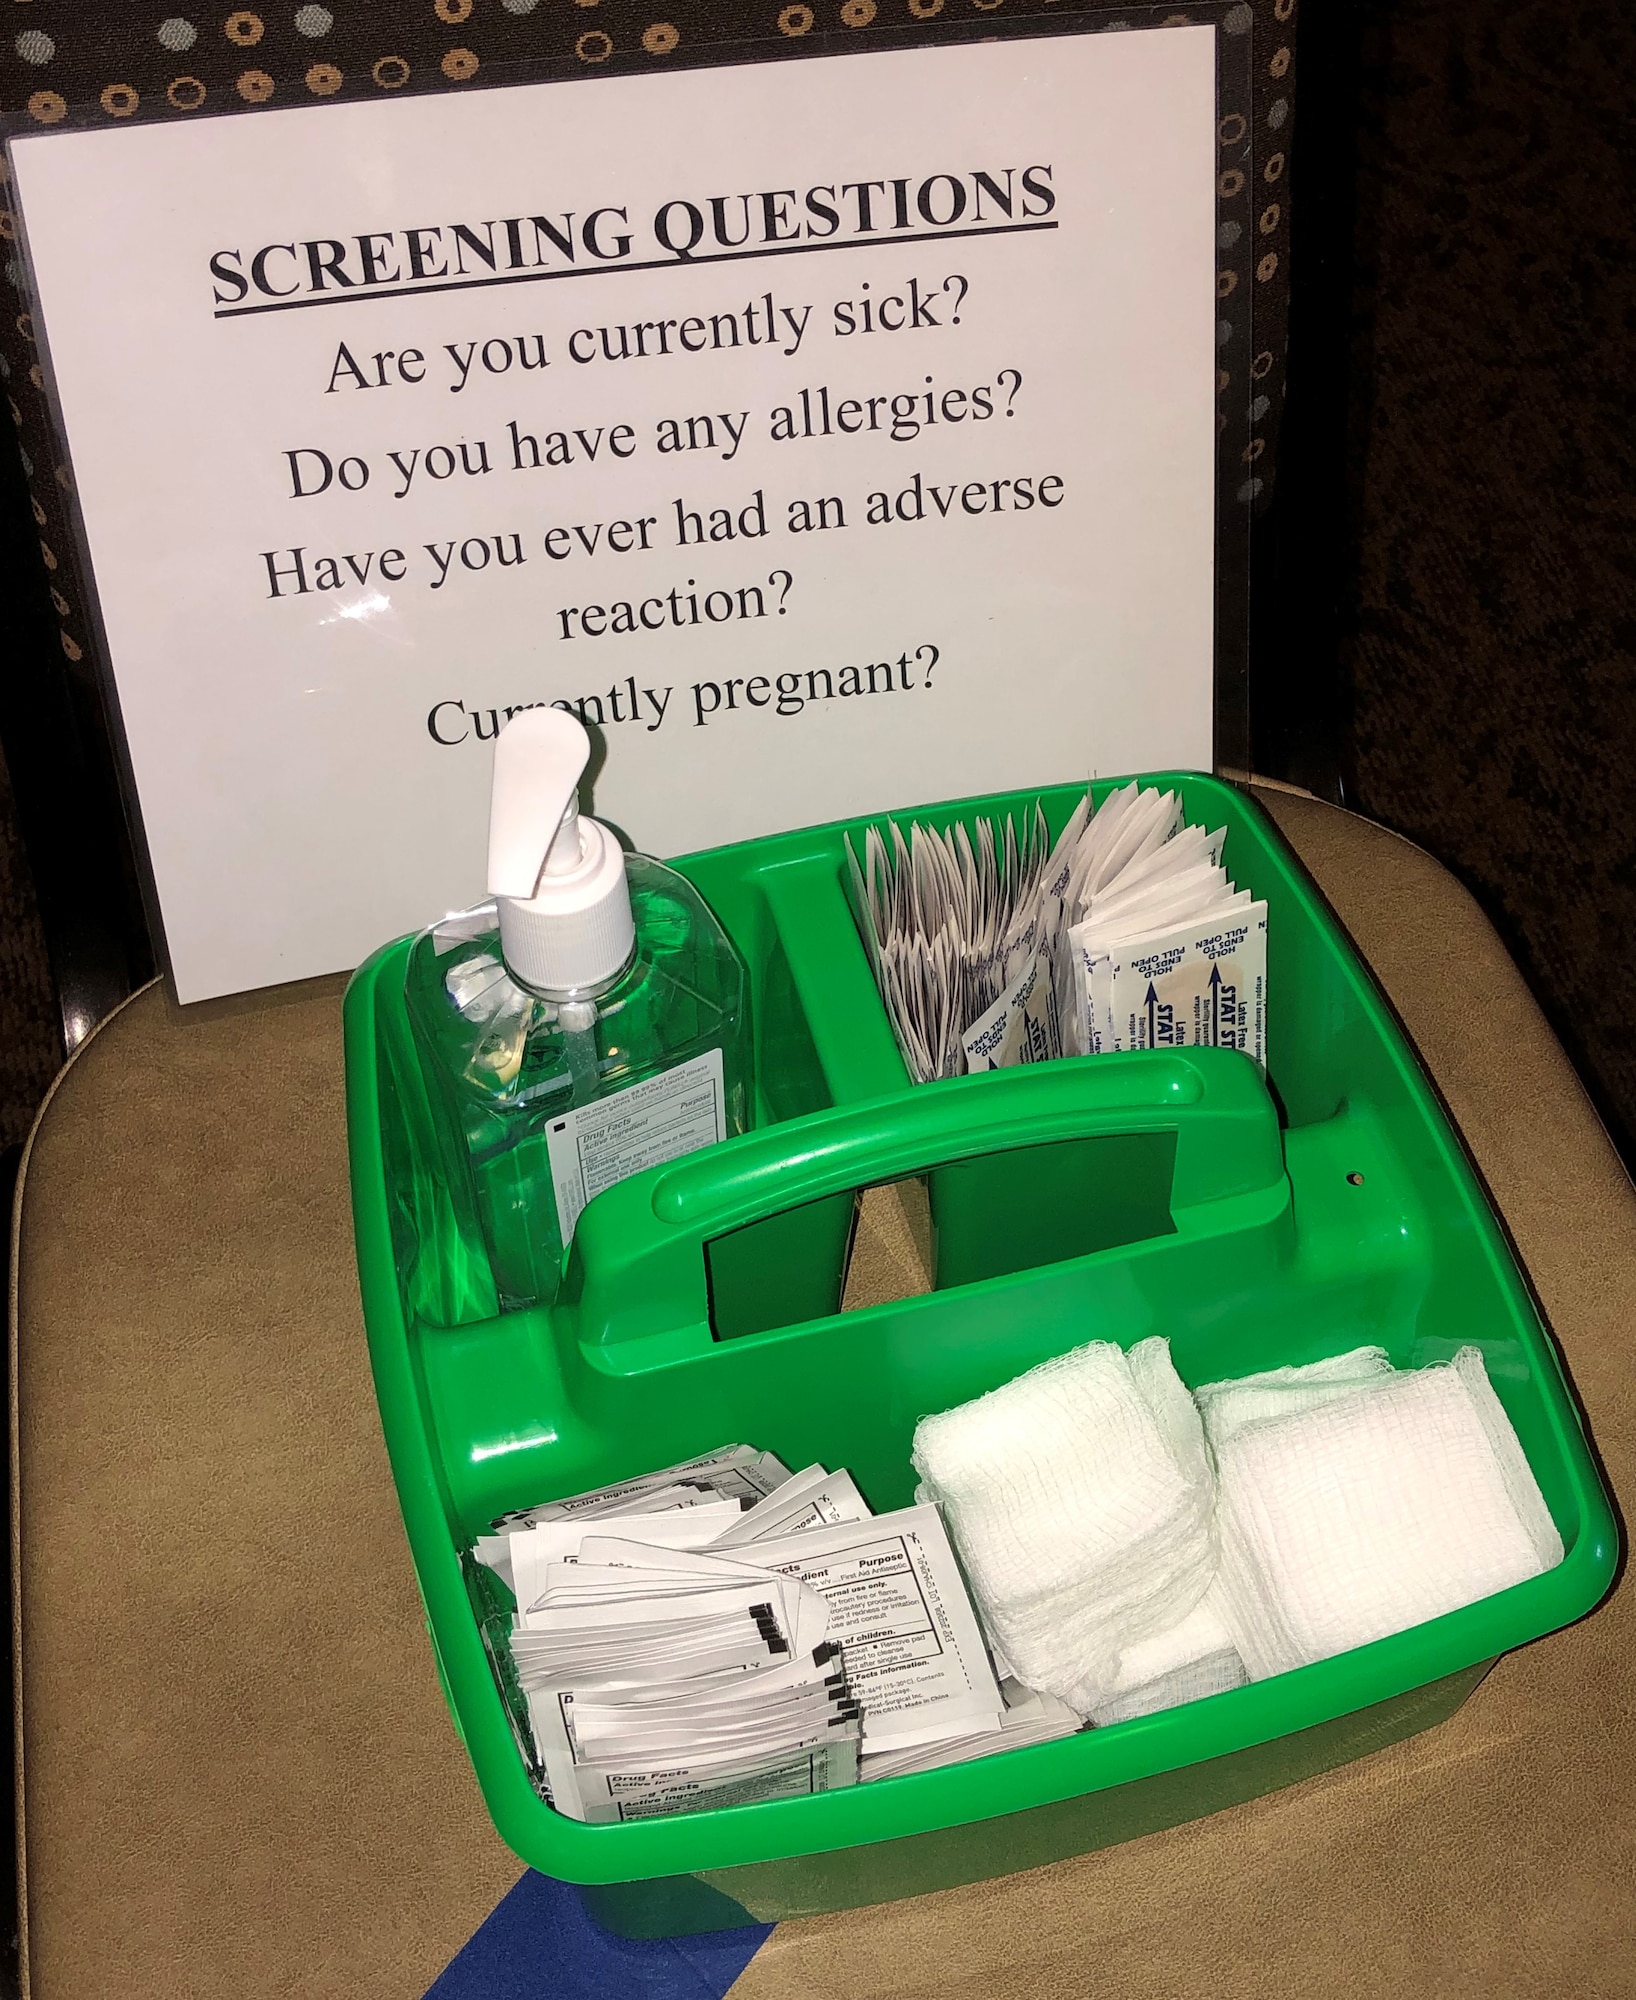 Preparations were carefully organized as well as providing a visual of the necessary screening questions.